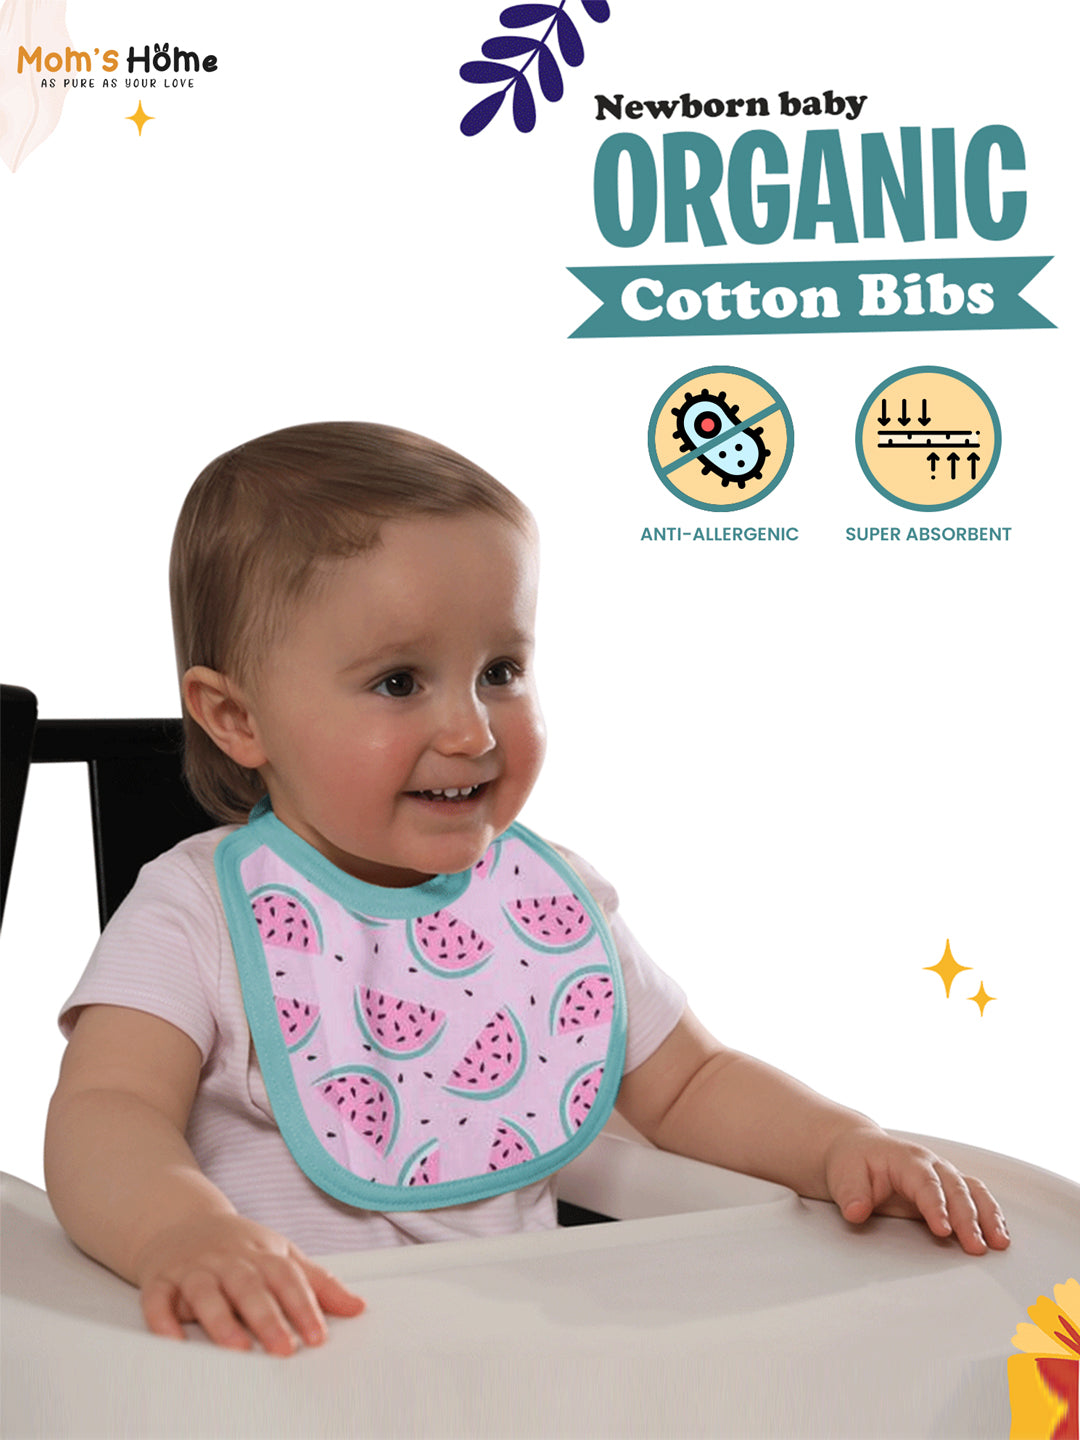 Moms Home Infant Kids Multi-Coloured  Printed Organic Cotton 20-Piece Baby Apparel Gift Set